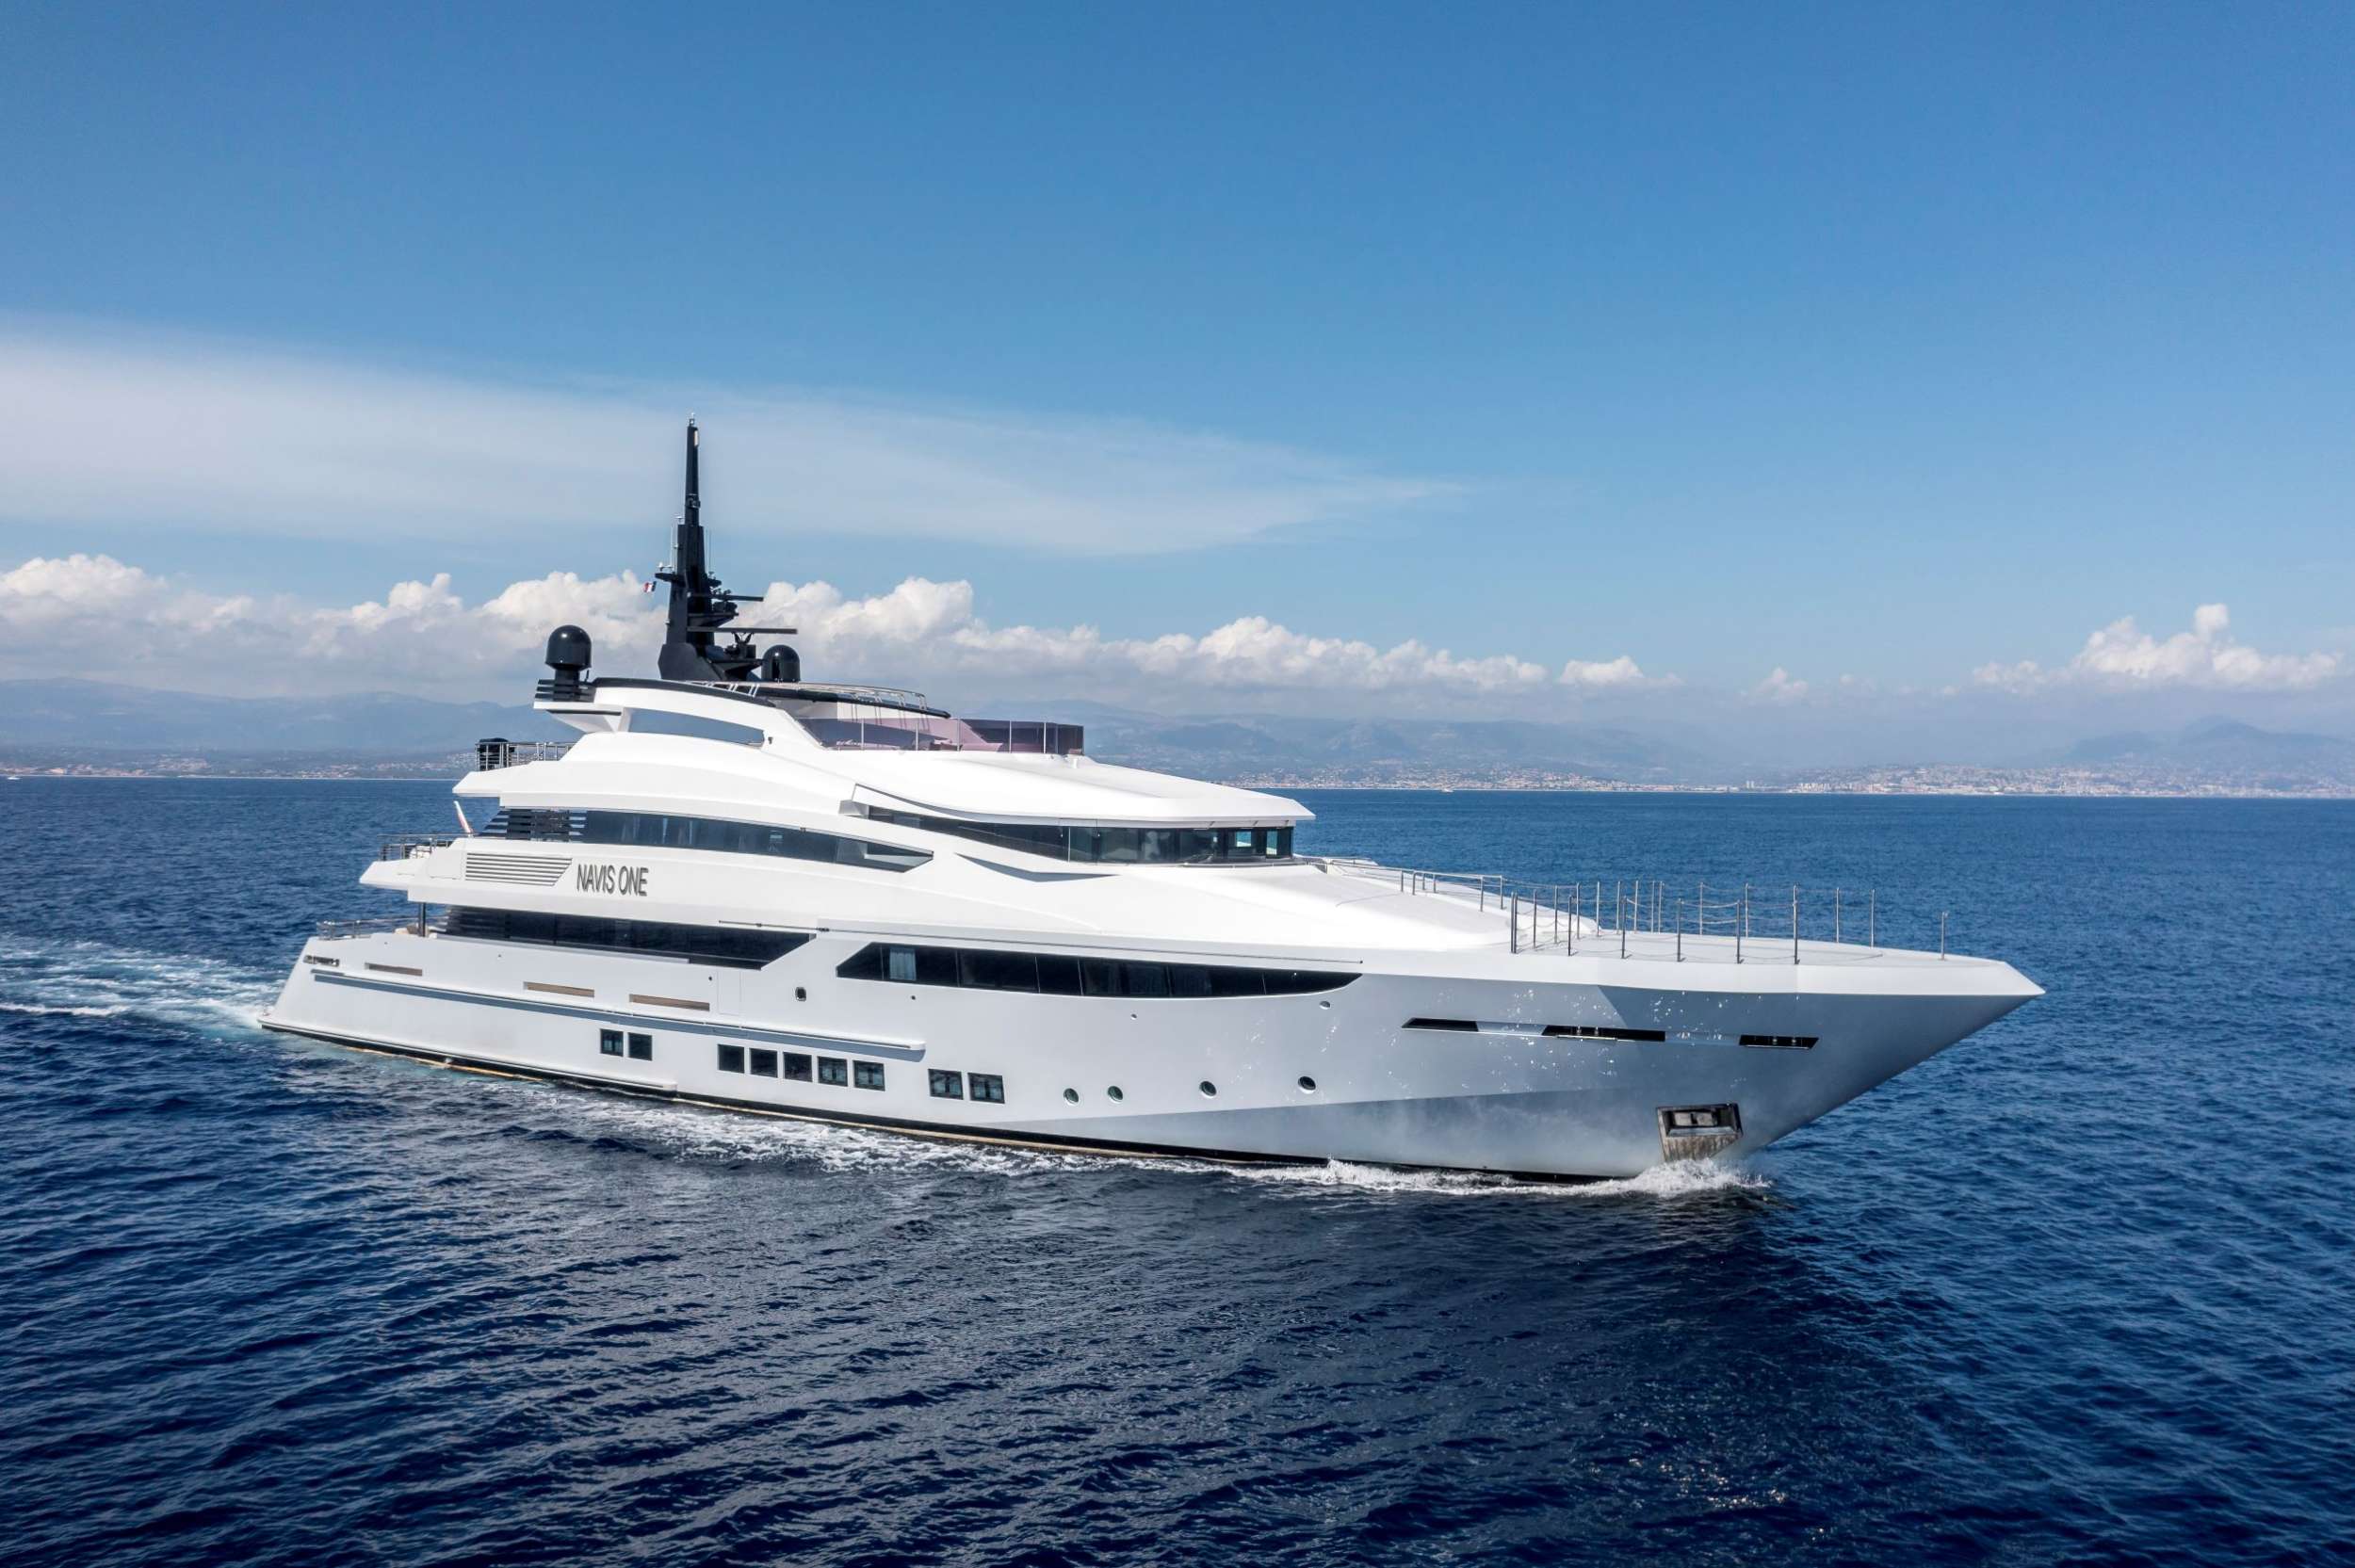 NAVIS ONE - Superyacht charter Thailand & Boat hire in Summer: W. Med -Naples/Sicily, Greece, W. Med -Riviera/Cors/Sard., Turkey, W. Med - Spain/Balearics, Croatia | Winter: Indian Ocean and SE Asia, Red Sea, United Arab Emirates 1